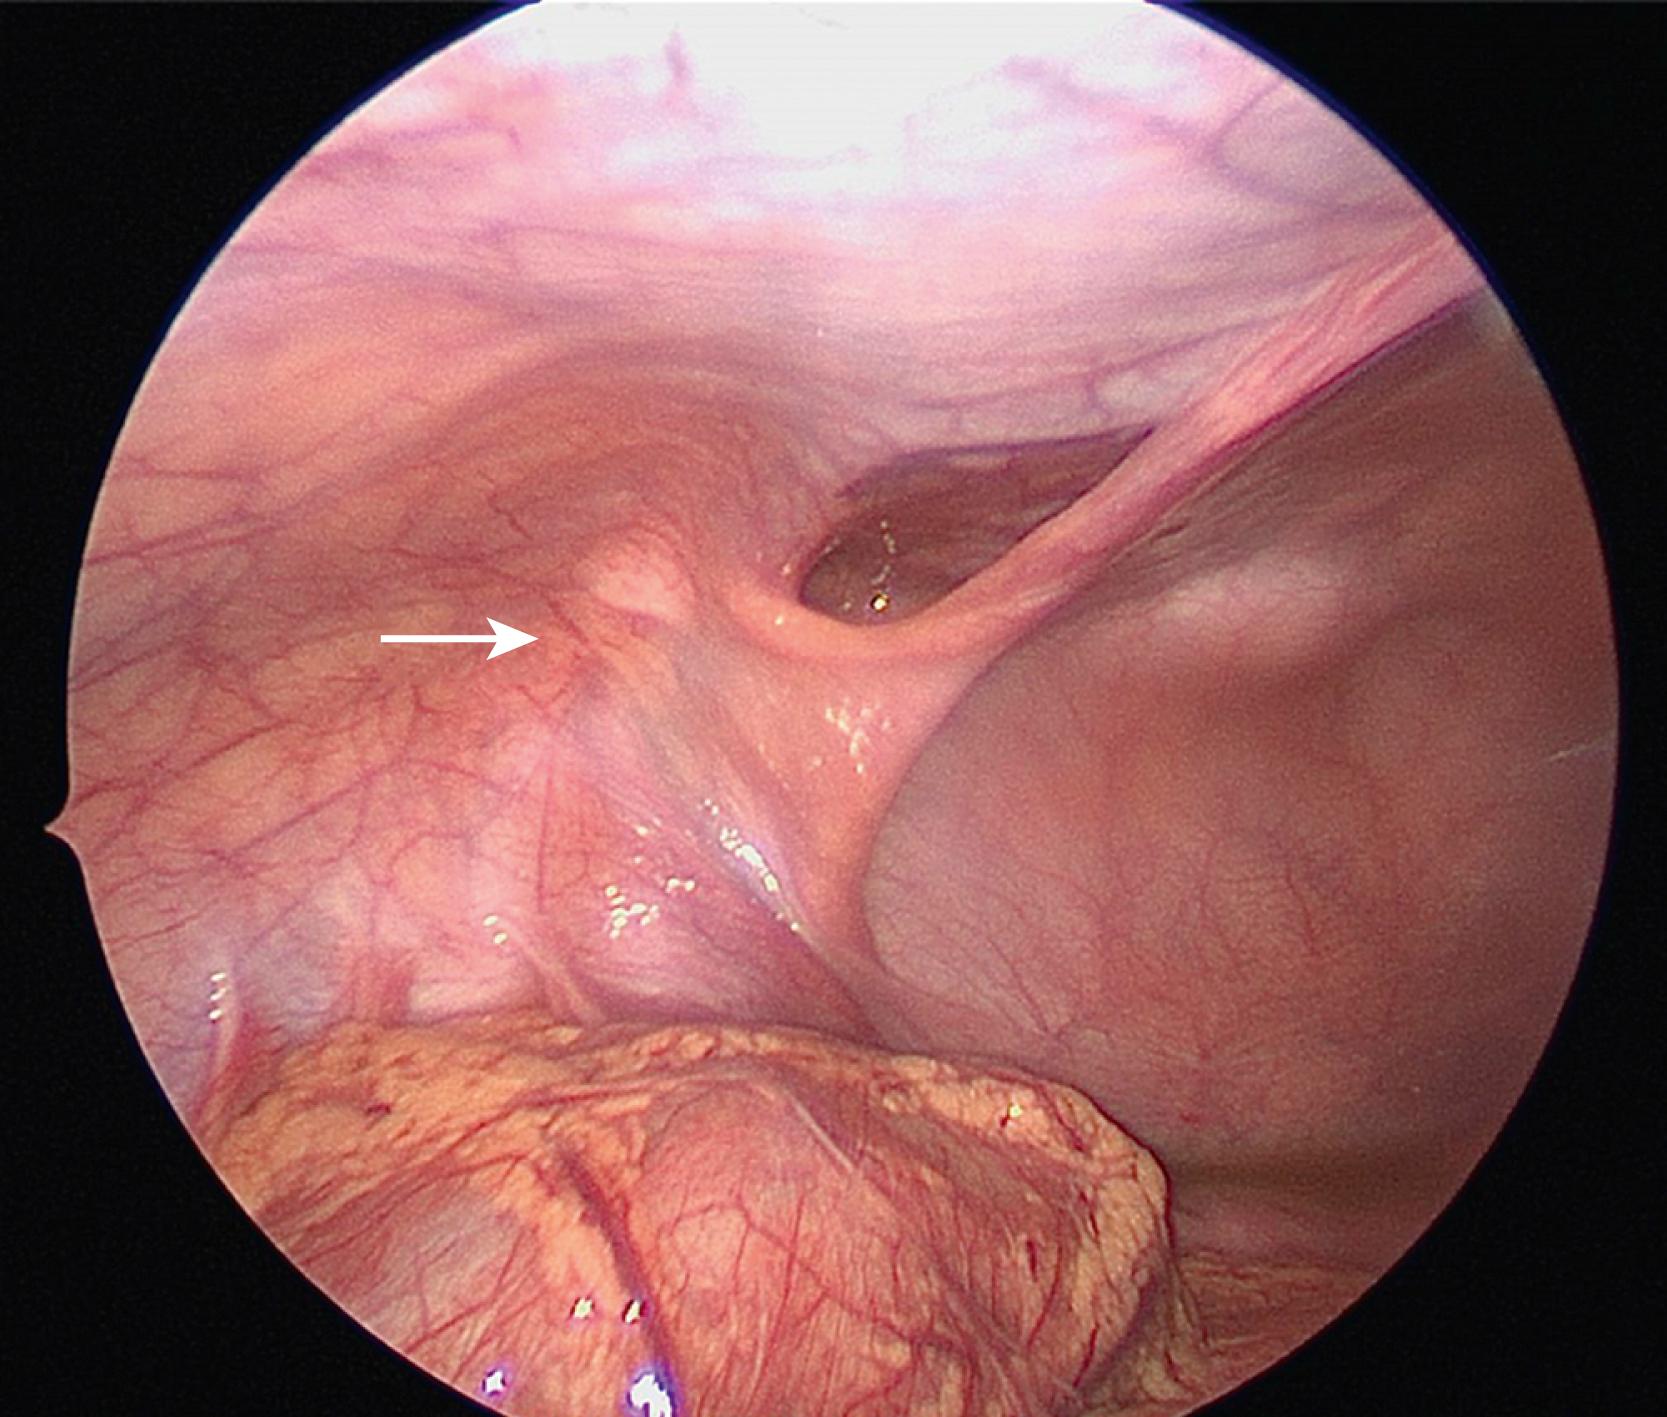 Fig. 50.3, This 15-year-old patient presented with a left inguino-femoral bulge that was suspicious for a left femoral hernia. The left femoral hernia was confirmed with diagnostic laparoscopy. She underwent a McVay repair and recovered uneventfully. Note the internal inguinal ring is closed (arrow).